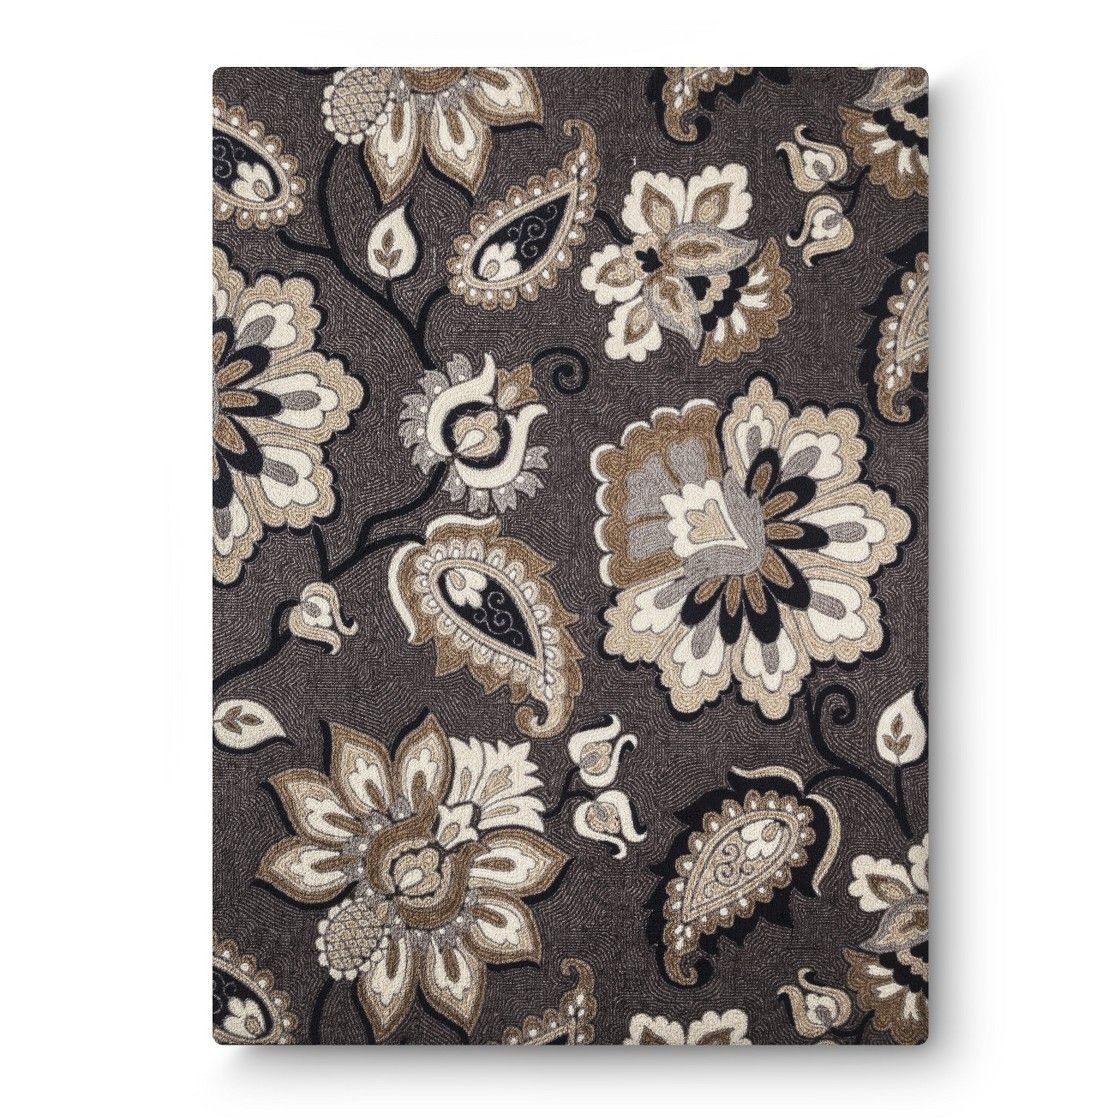 Living Room Rugs Target
 Floral Print Rug living room from Tar With images